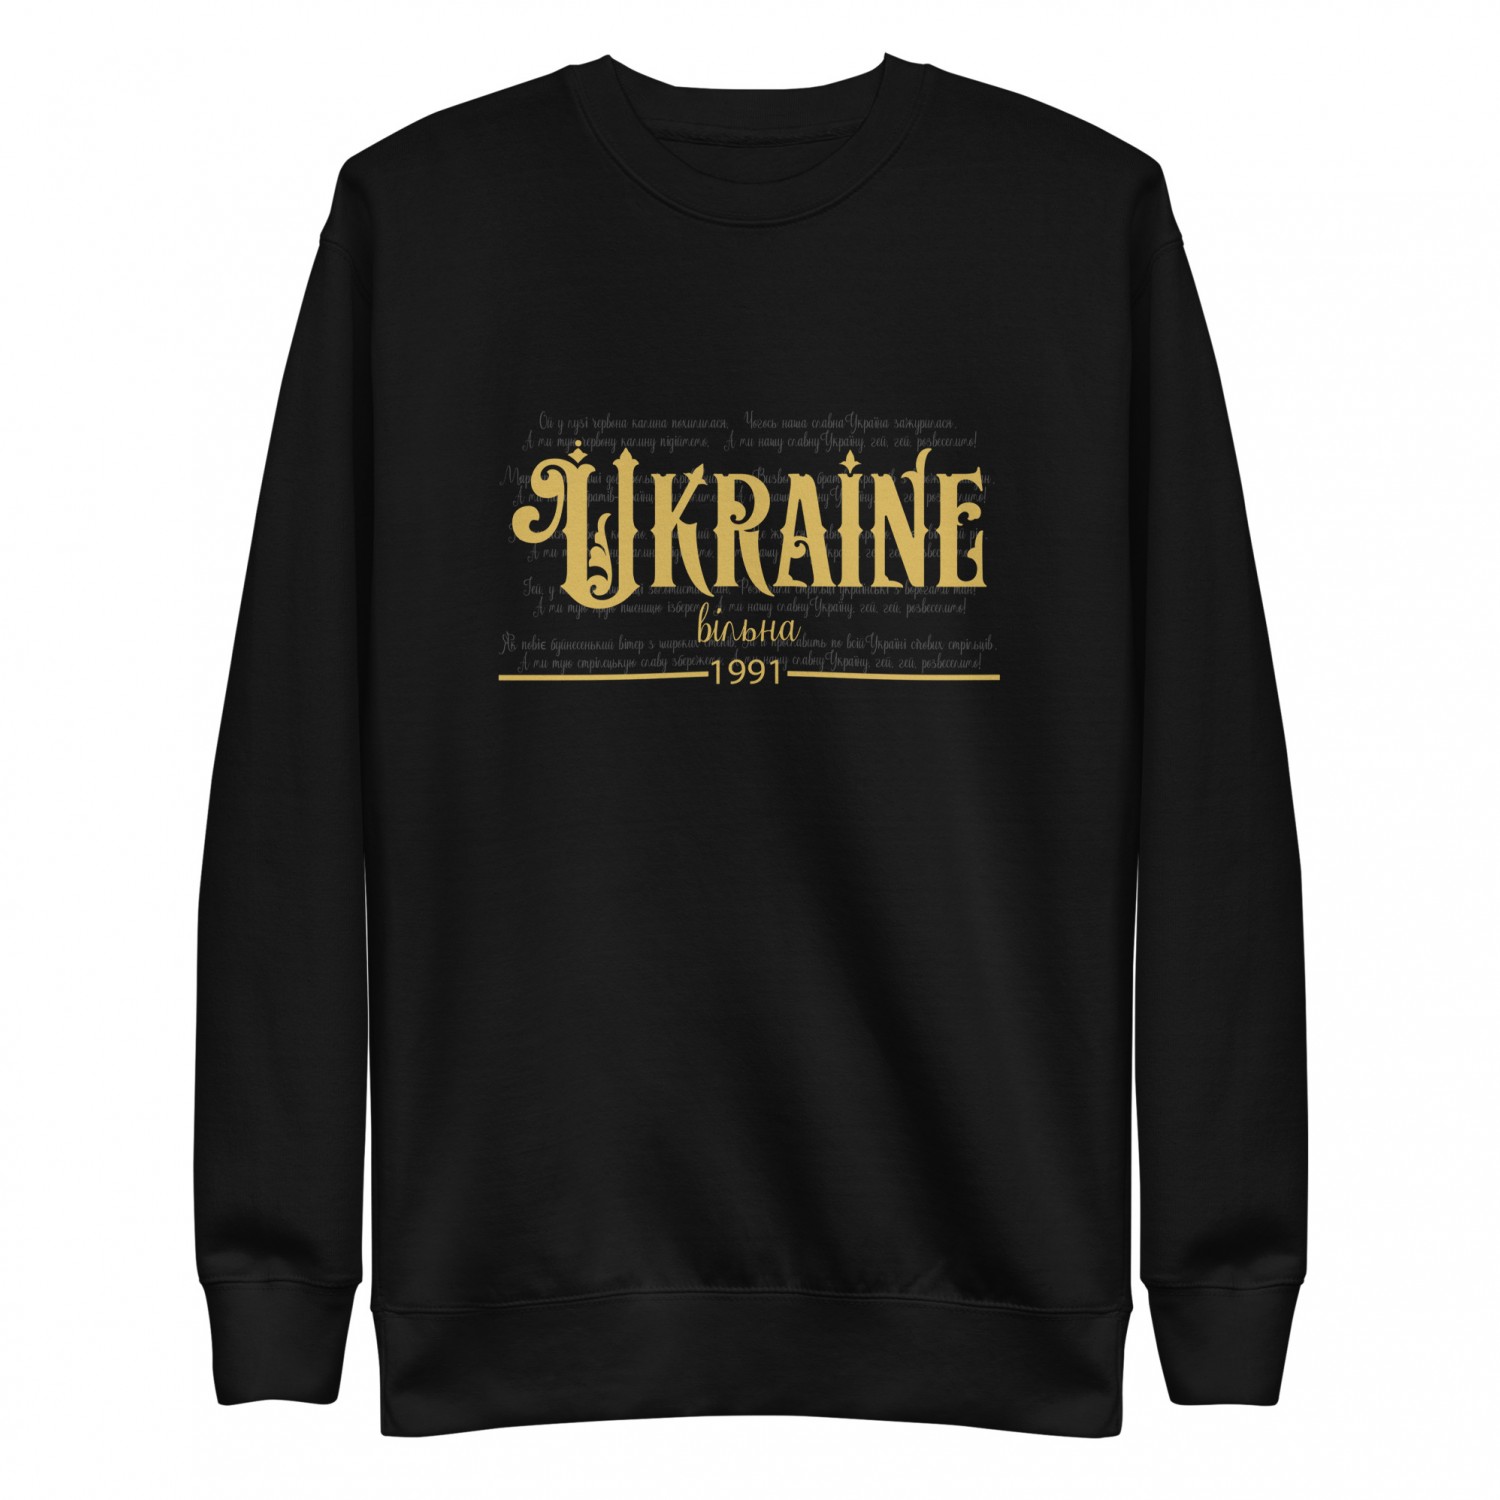 Ukraine has the opportunity to buy a sweatshirt for free